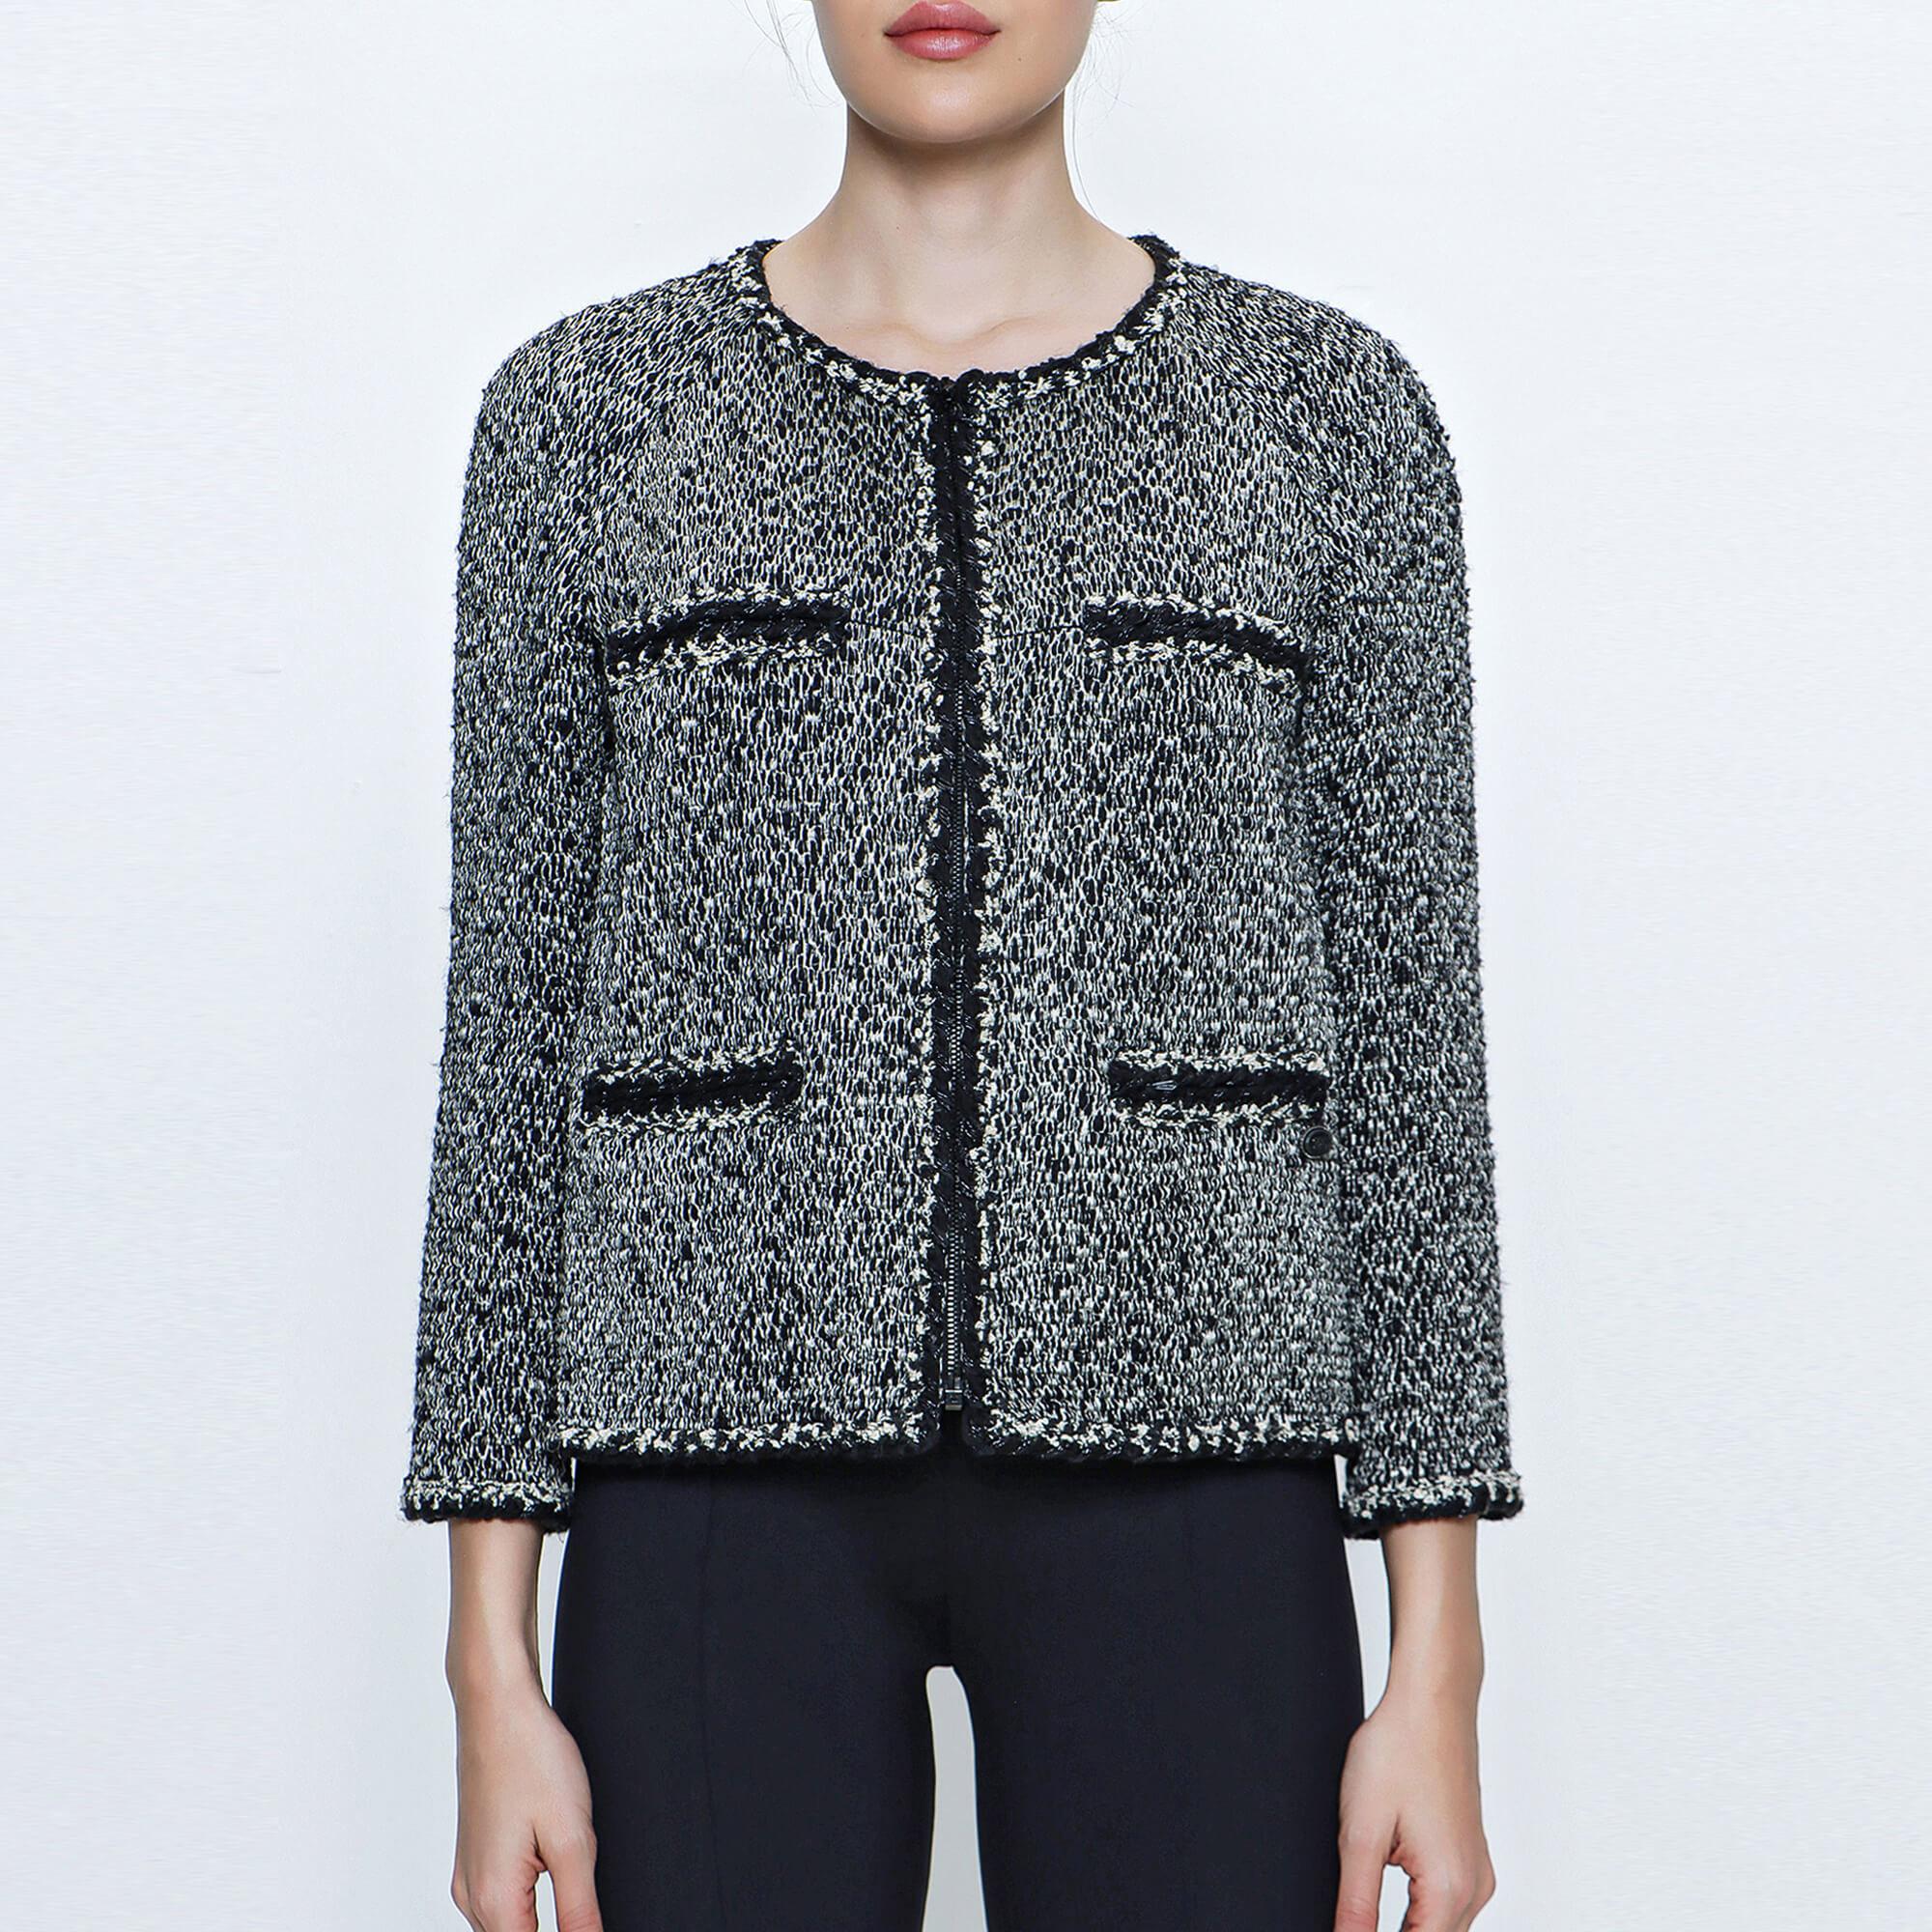 Women's or Men's Chanel Black Tweed Jacket with Braided Trim